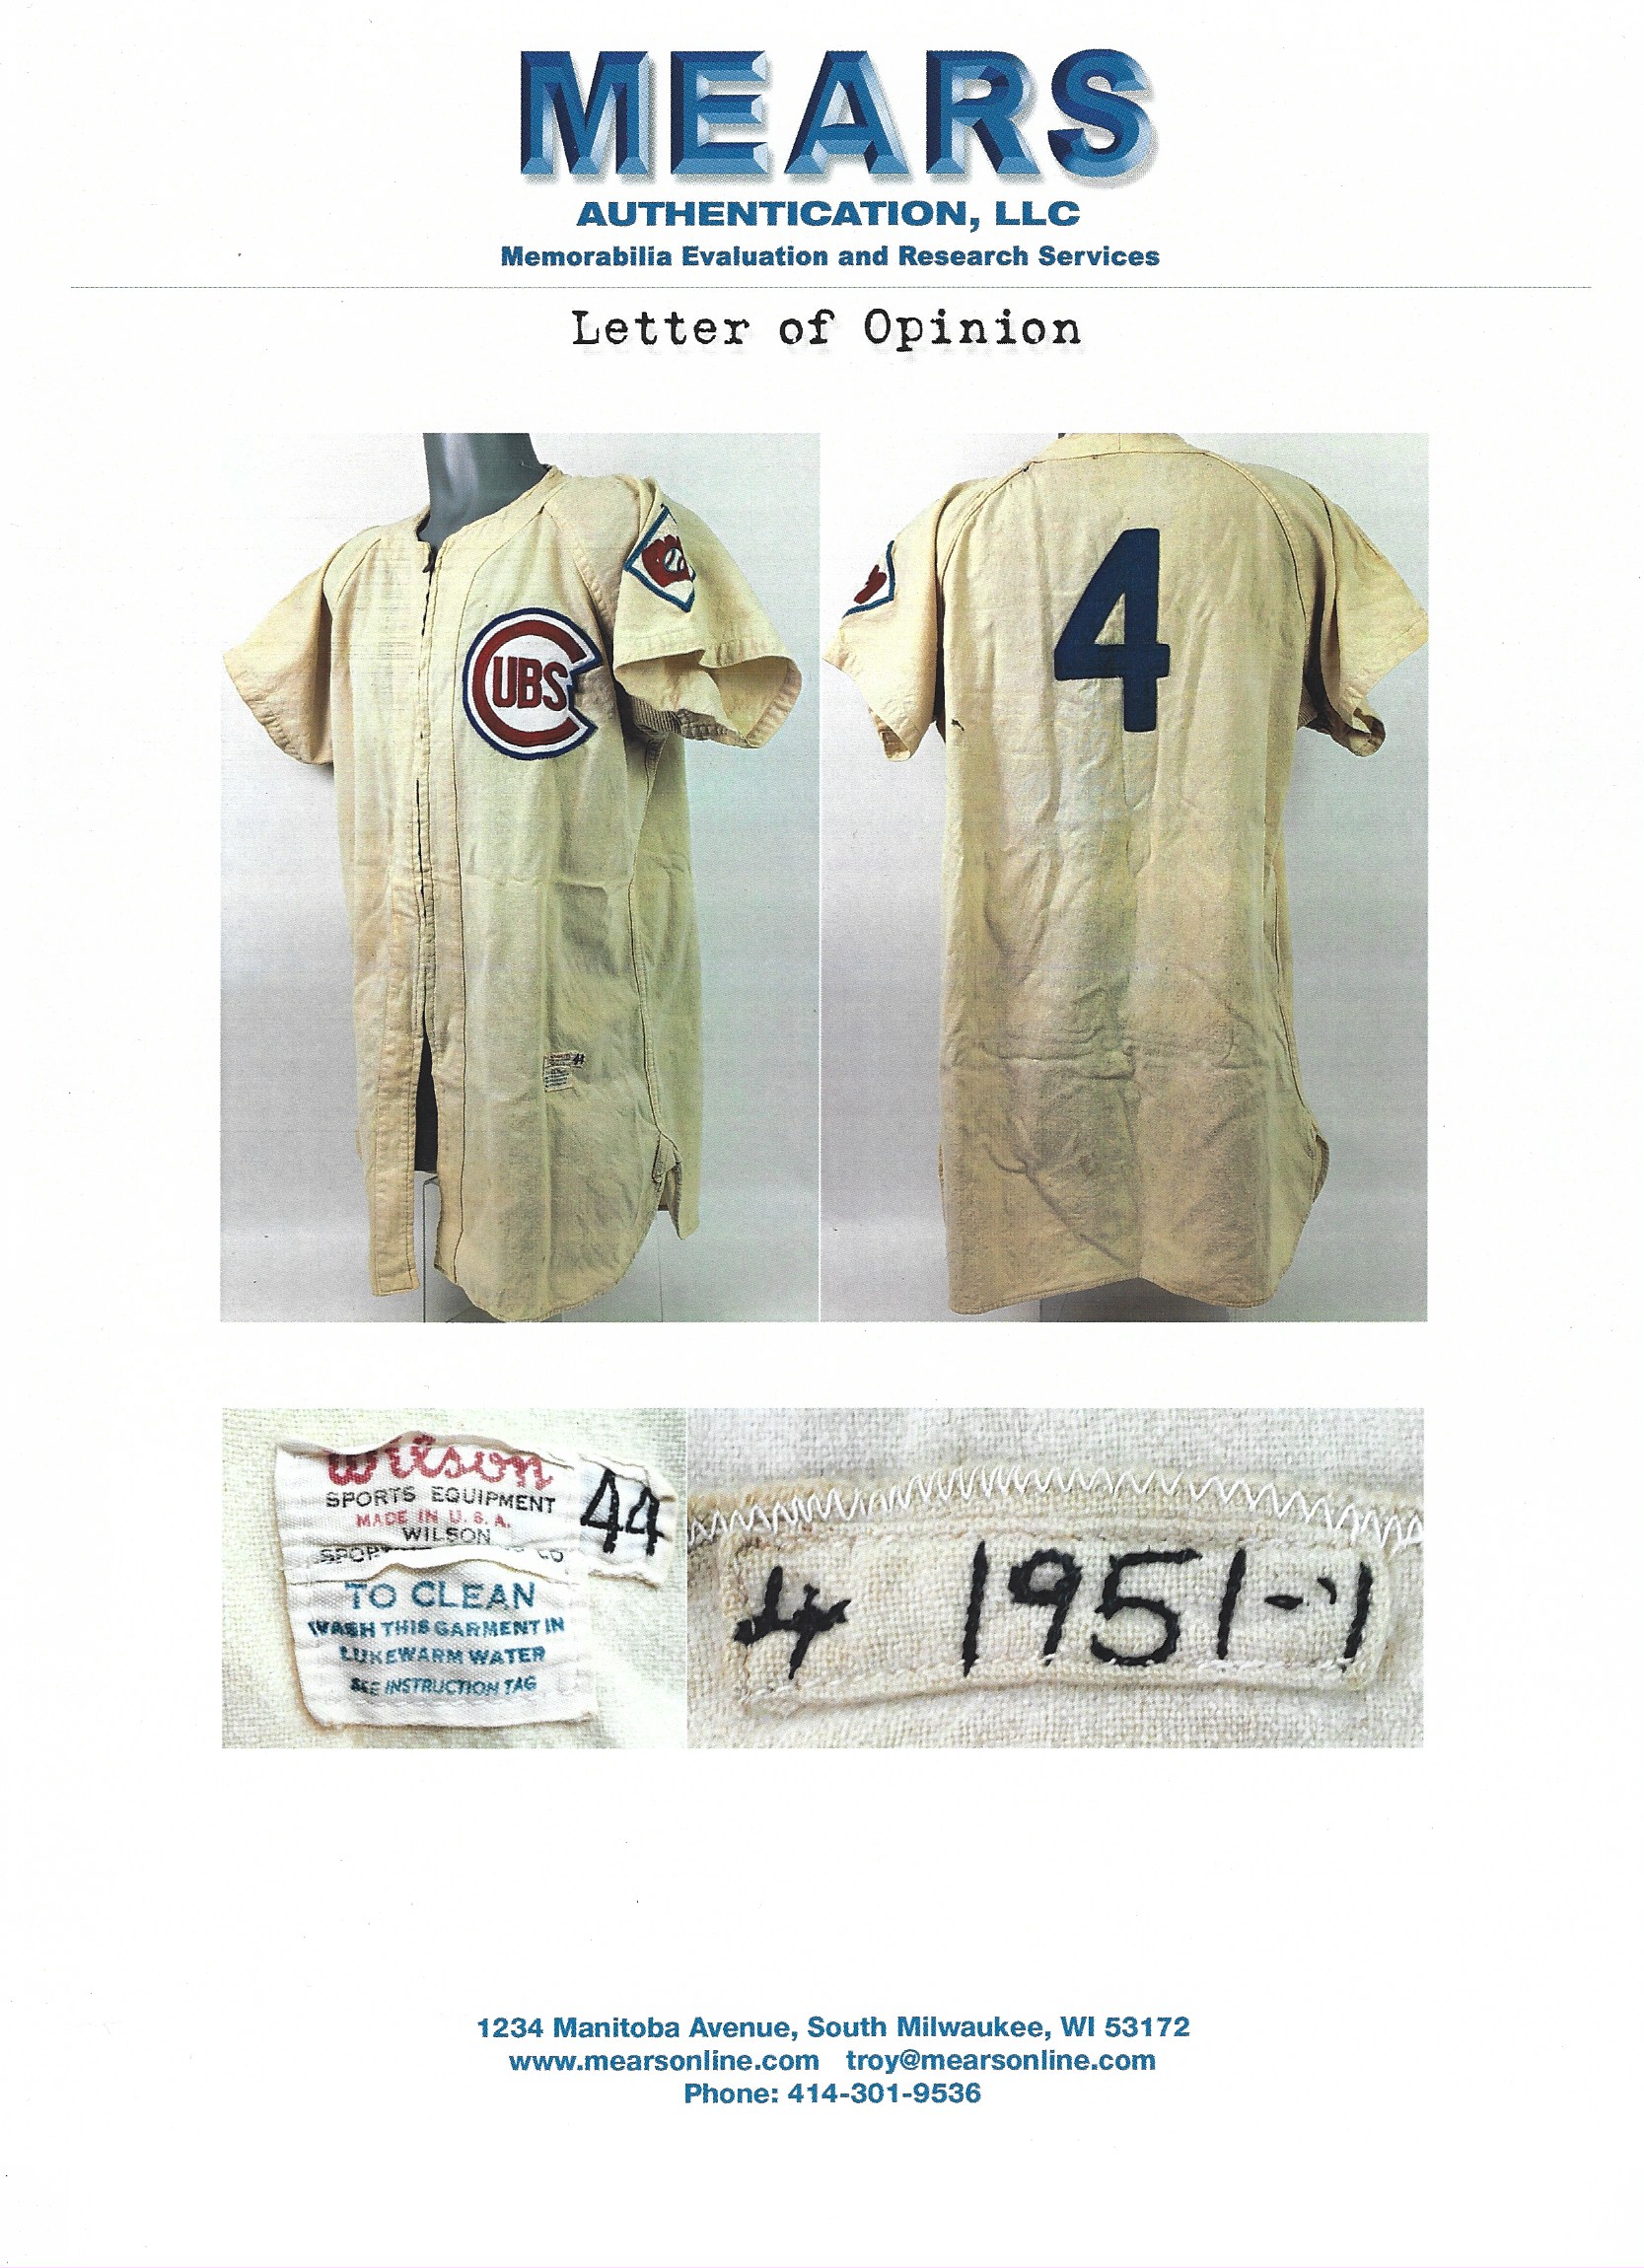 1951 Jackie Robinson Game-Used Brooklyn Dodgers Home Jersey (MEARS